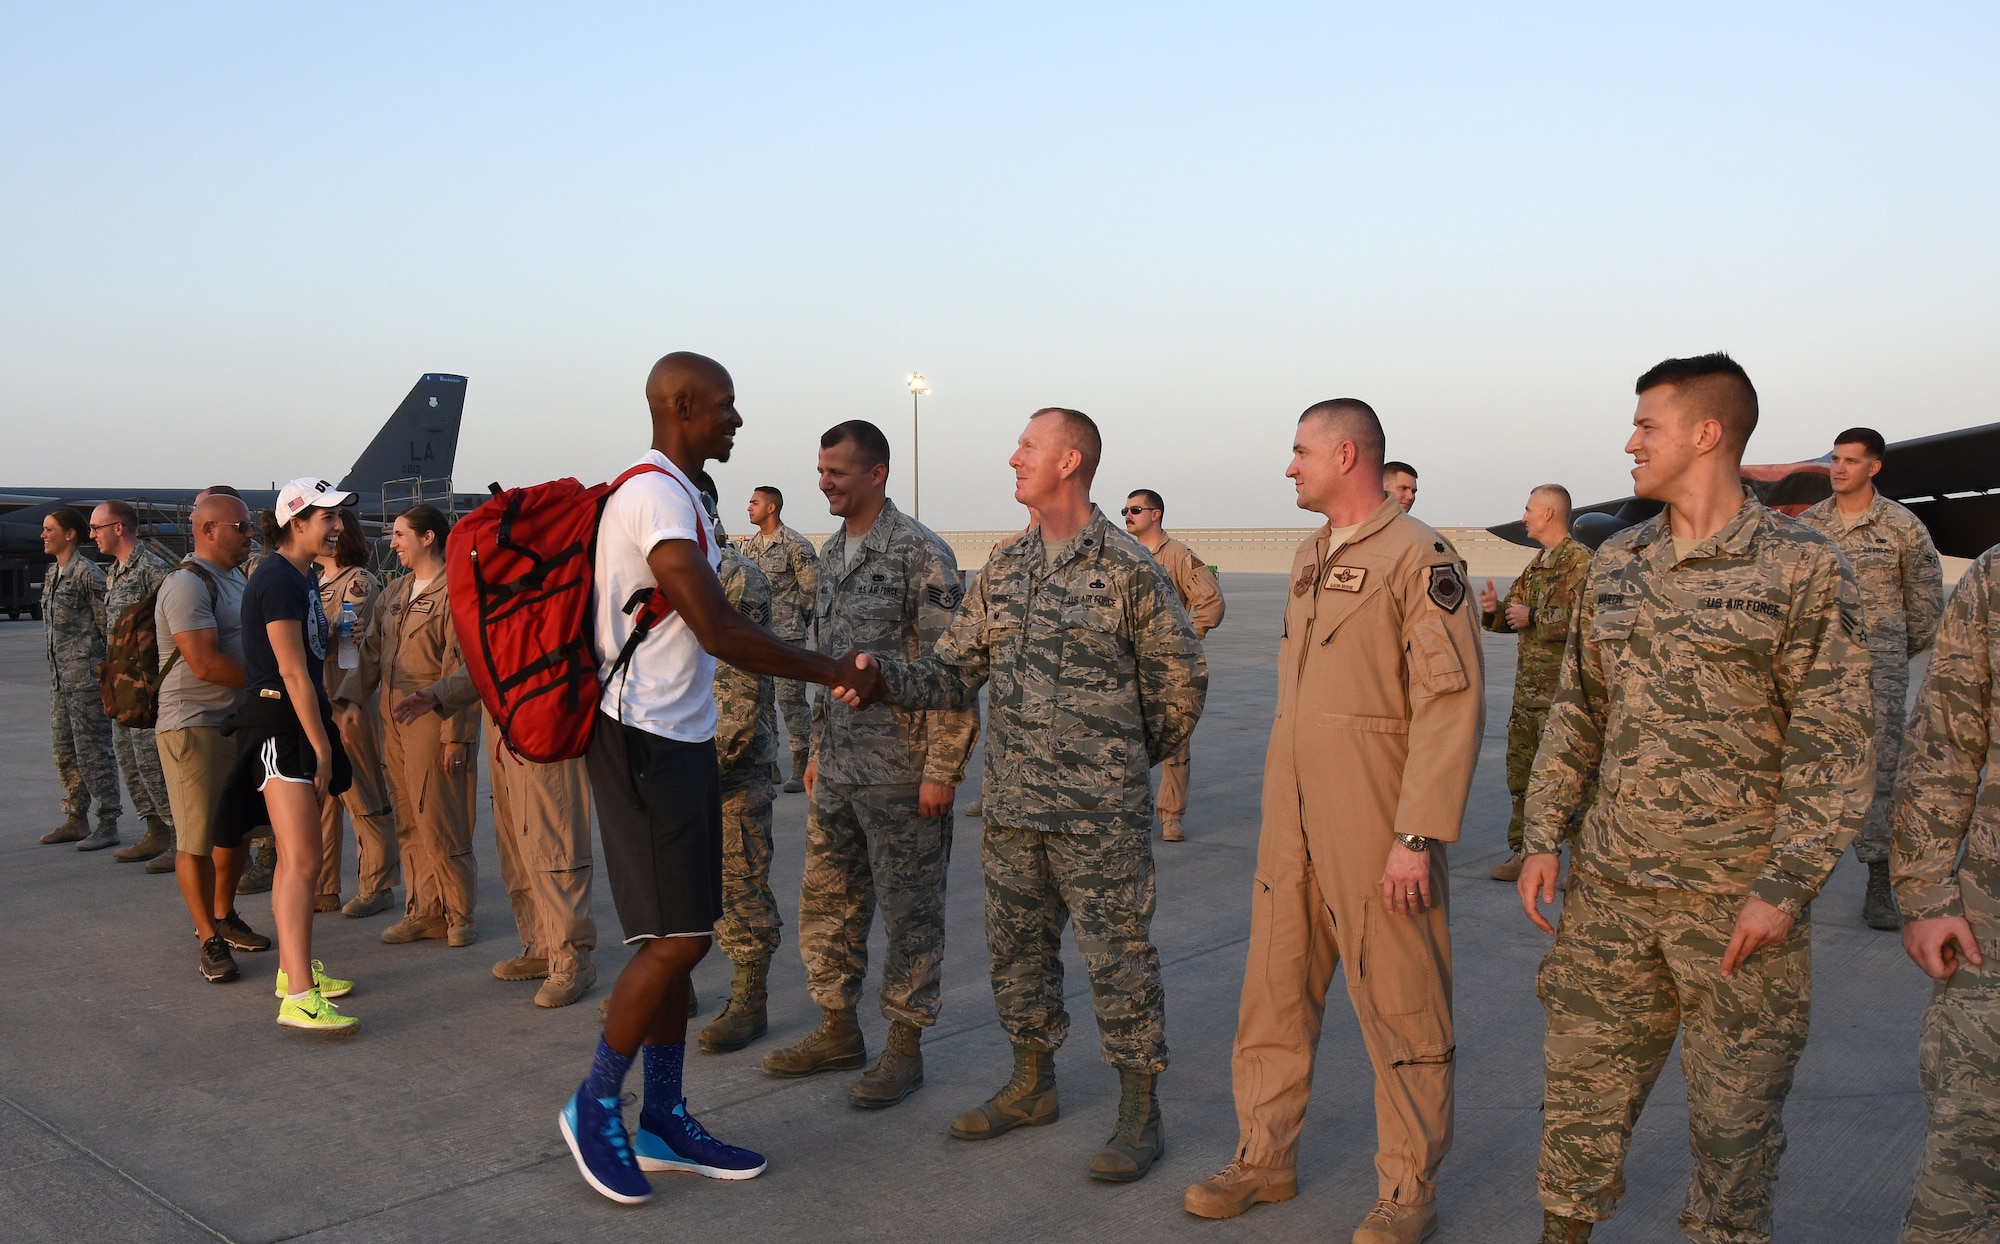 Ray Allen, a retired National Basketball Association player, and Maya DiRado, a U.S. Olympic swimmer and medalist, meet with Airmen during a USO entertainment tour at Al Udeid Air Base, Qatar, Dec. 6, 2016. The tour featured four other guests including country singer Craig Campbell, actor Chris Evans, actress Scarlett Johansson, and mentalist and entertainer Jim Karol. (U.S. Air Force photo by Senior Airman Cynthia A. Innocenti)